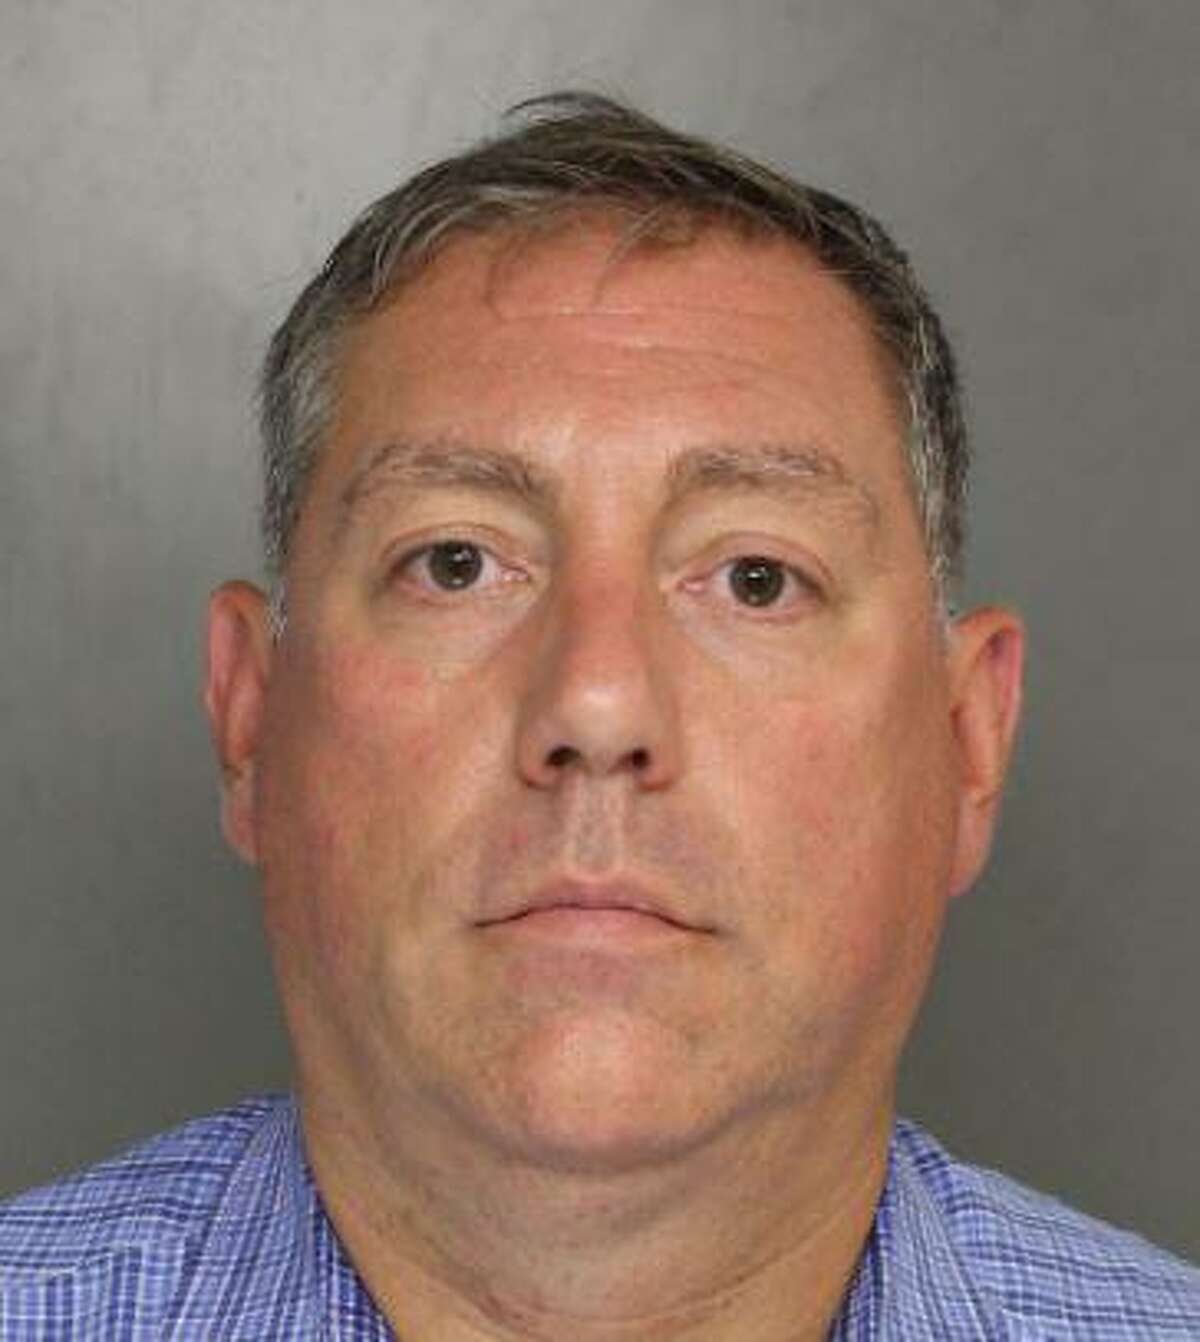 In 2018, Scott Marinelli was charged with numerous crimes in connection with several real estate transactions in Monroe County, Pennsylvania. He ended up spending four months in jail.